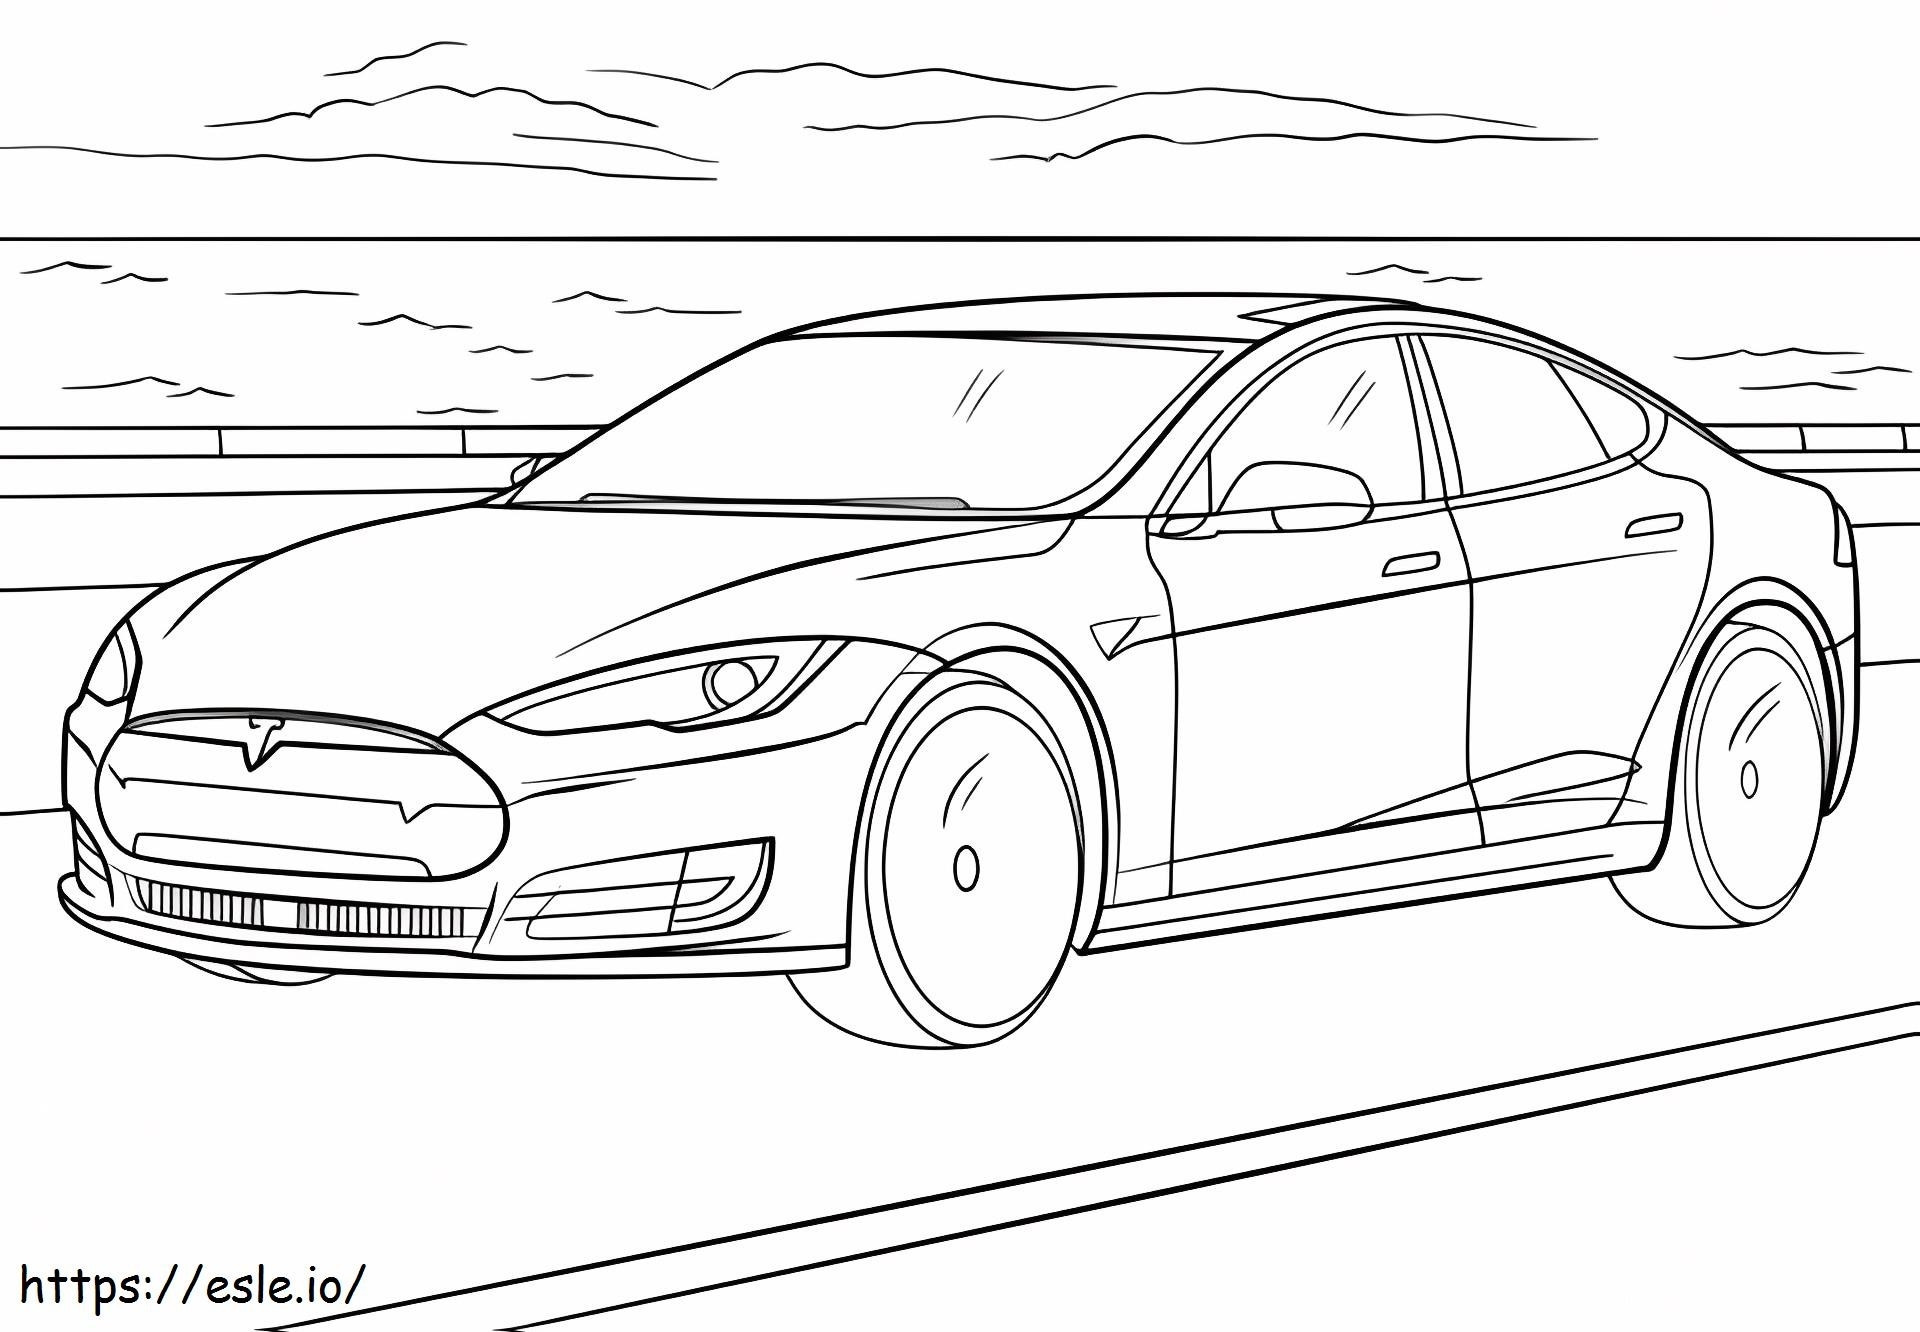 Tesla Model S coloring page